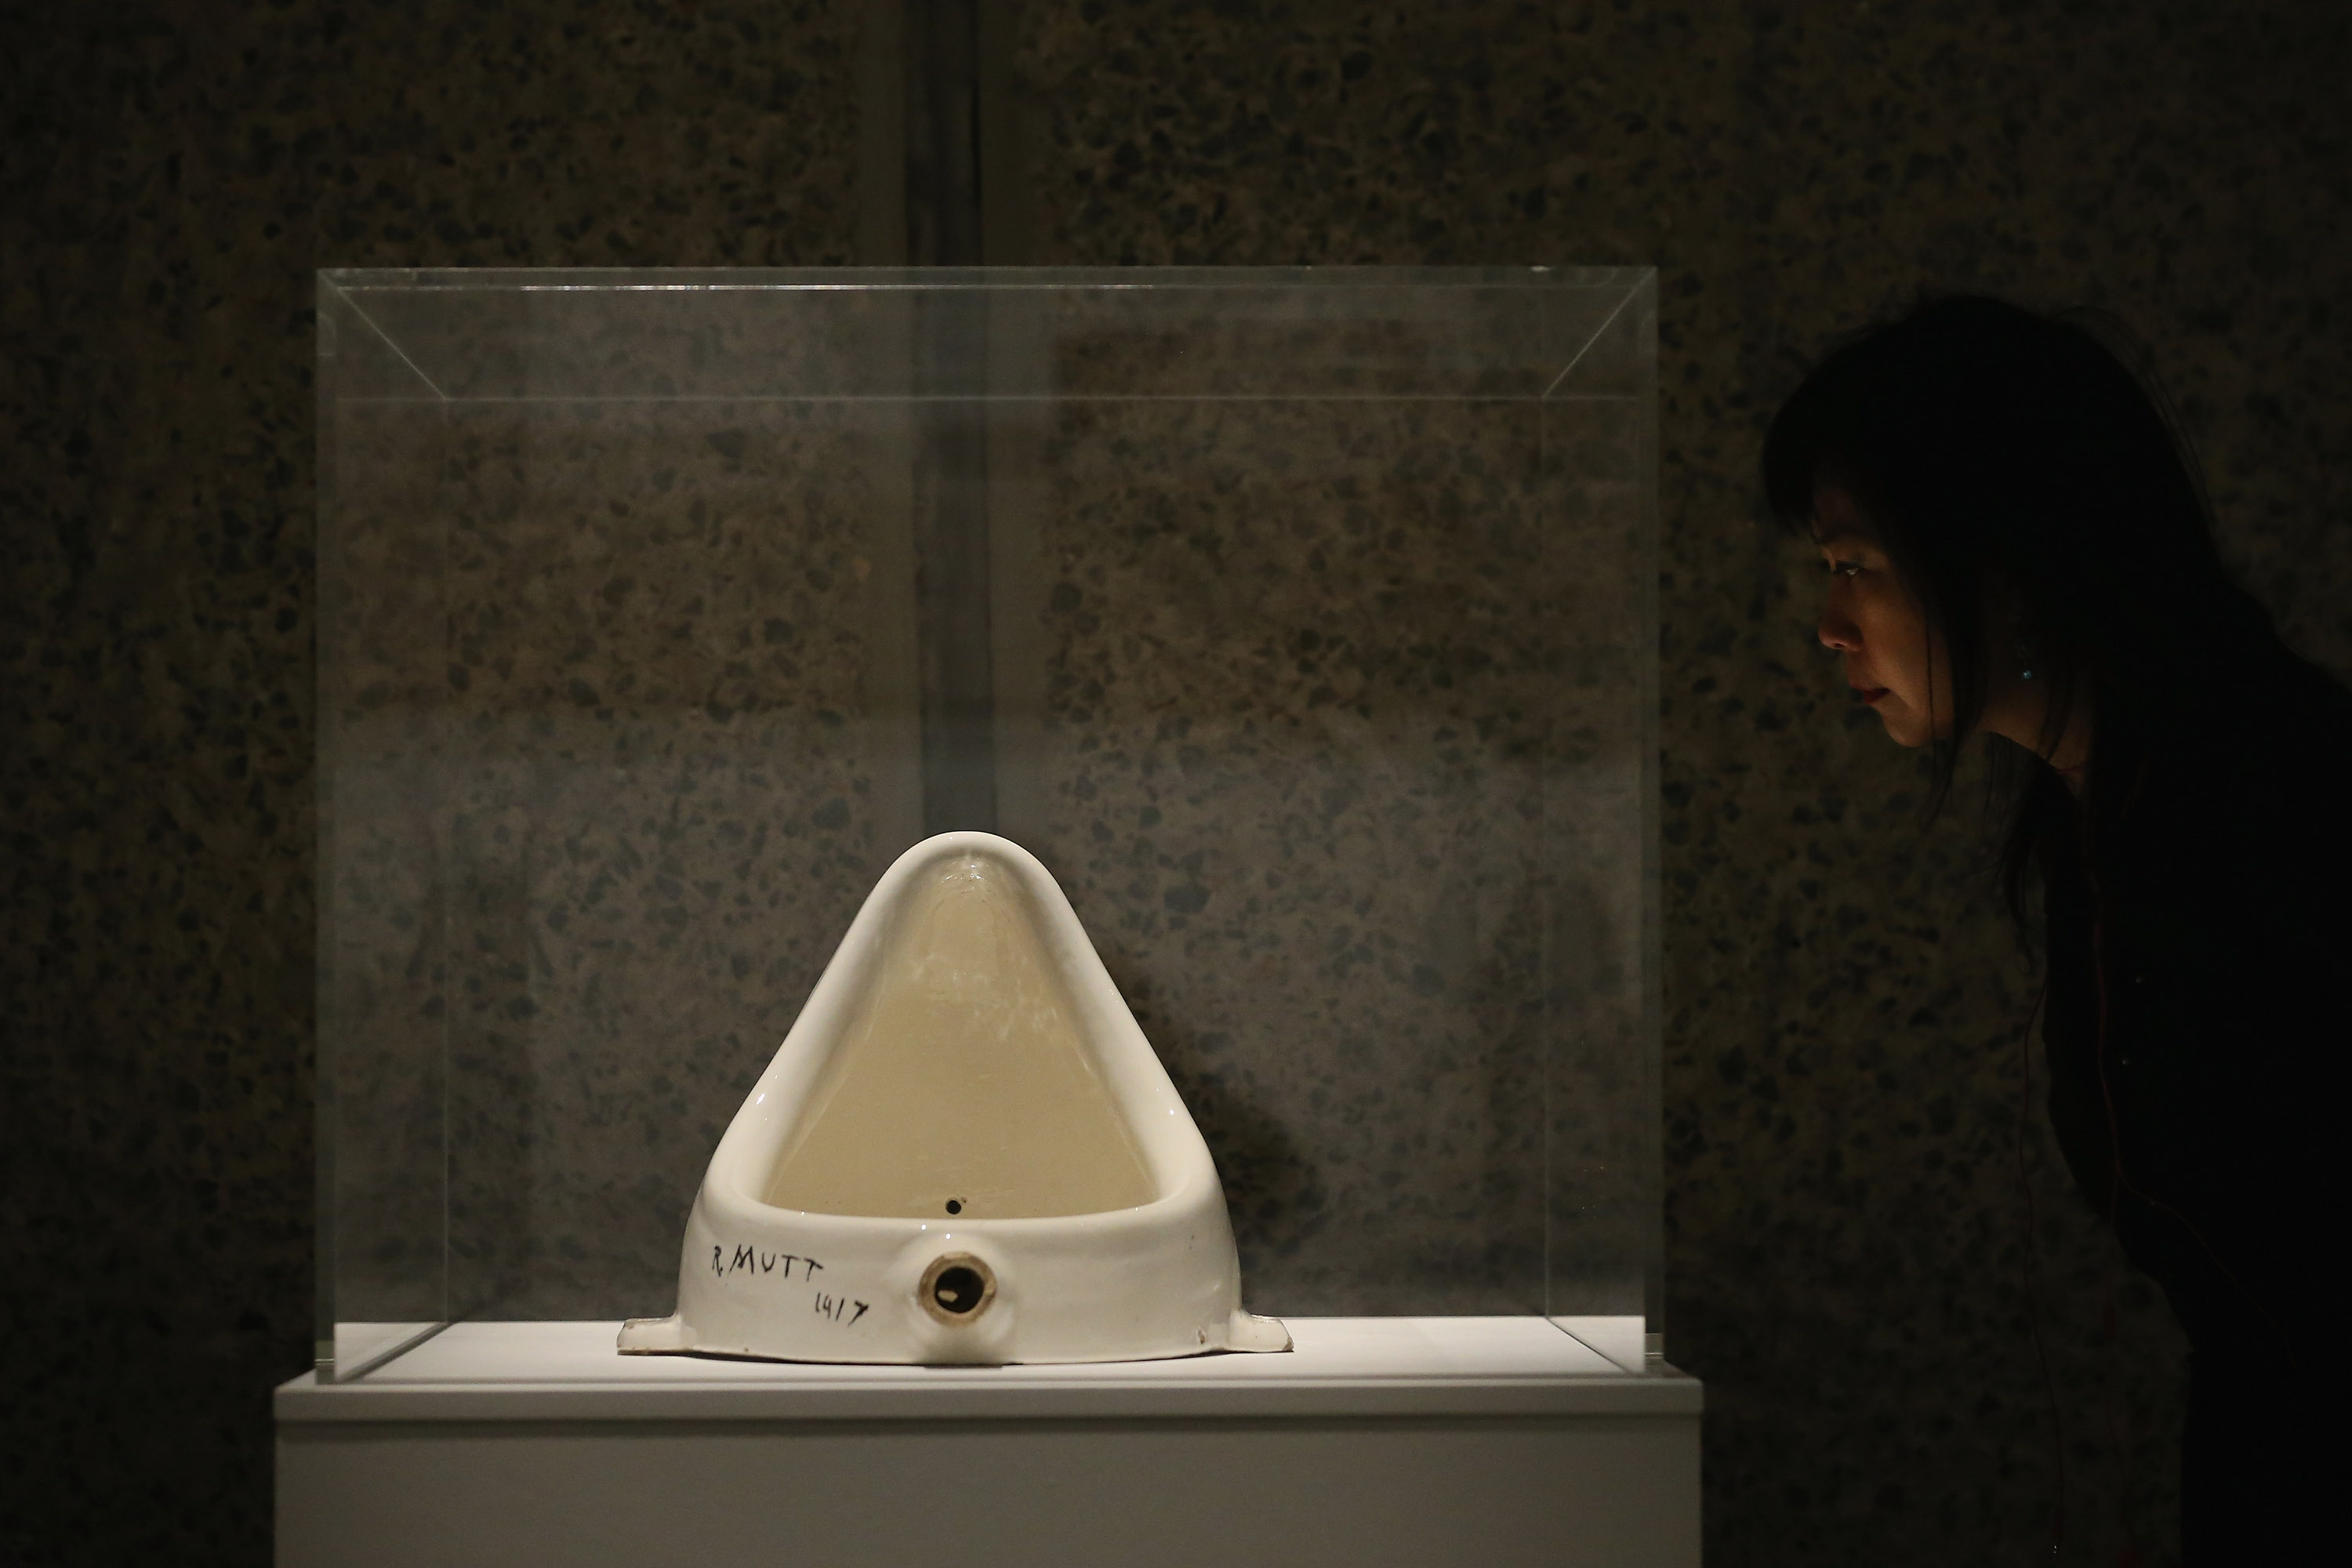 A woman looks at a piece of work entitled 'Fountain' by Marcel Duchamp during a press preview of 'The Bride and the Bachelors' exhibition at the Barbican Art Gallery on February 13, 2013 in London, England. The piece makes up a selection of works by artists and choreographers including Marcel Duchamp, Merce Cunningham, John Cage, Robert Rauschenberg and Jasper Johns, and runs at the Barbican Art Gallery until June 9, 2013.